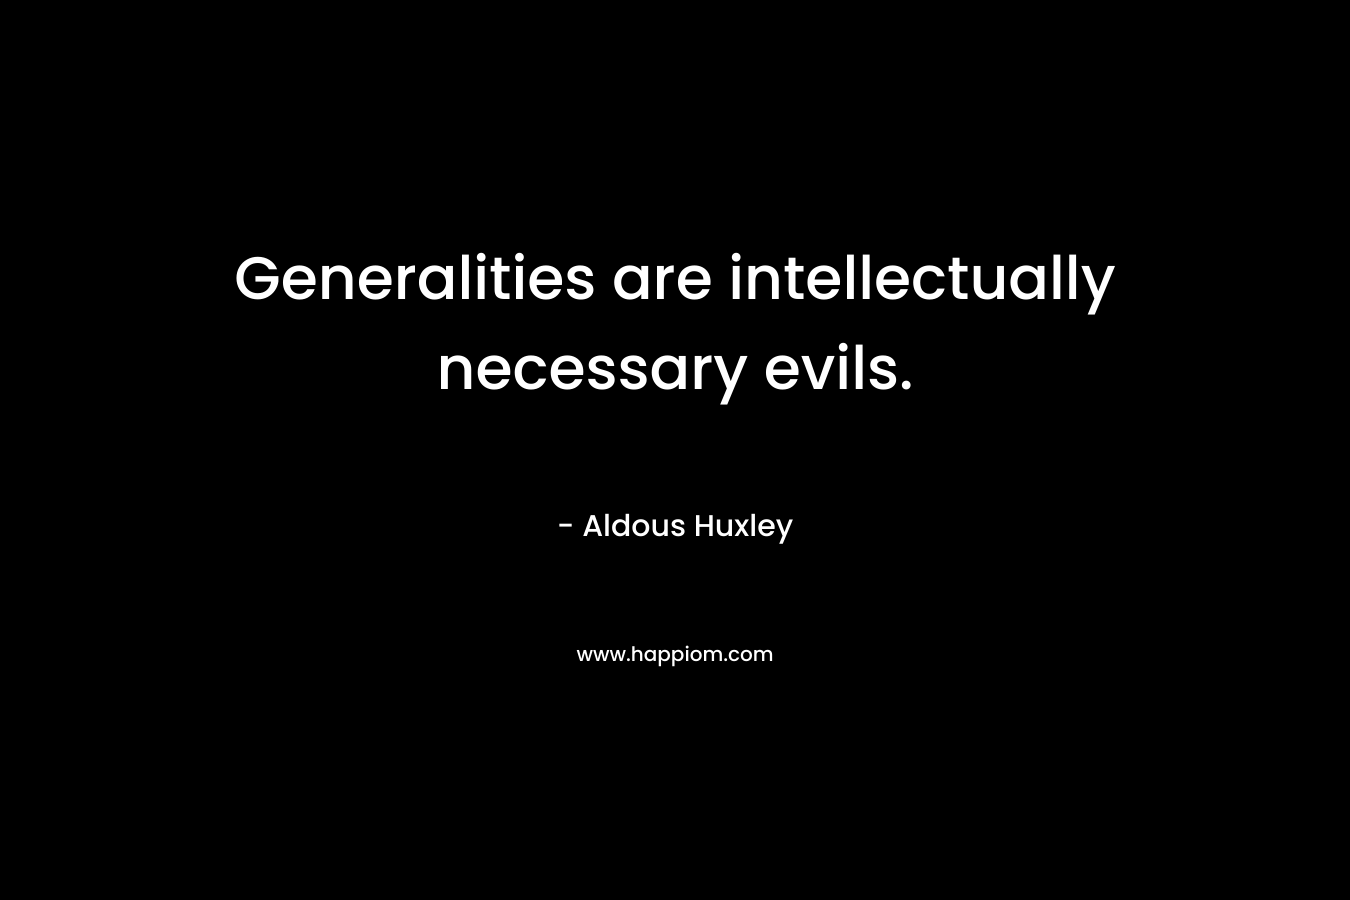 Generalities are intellectually necessary evils.